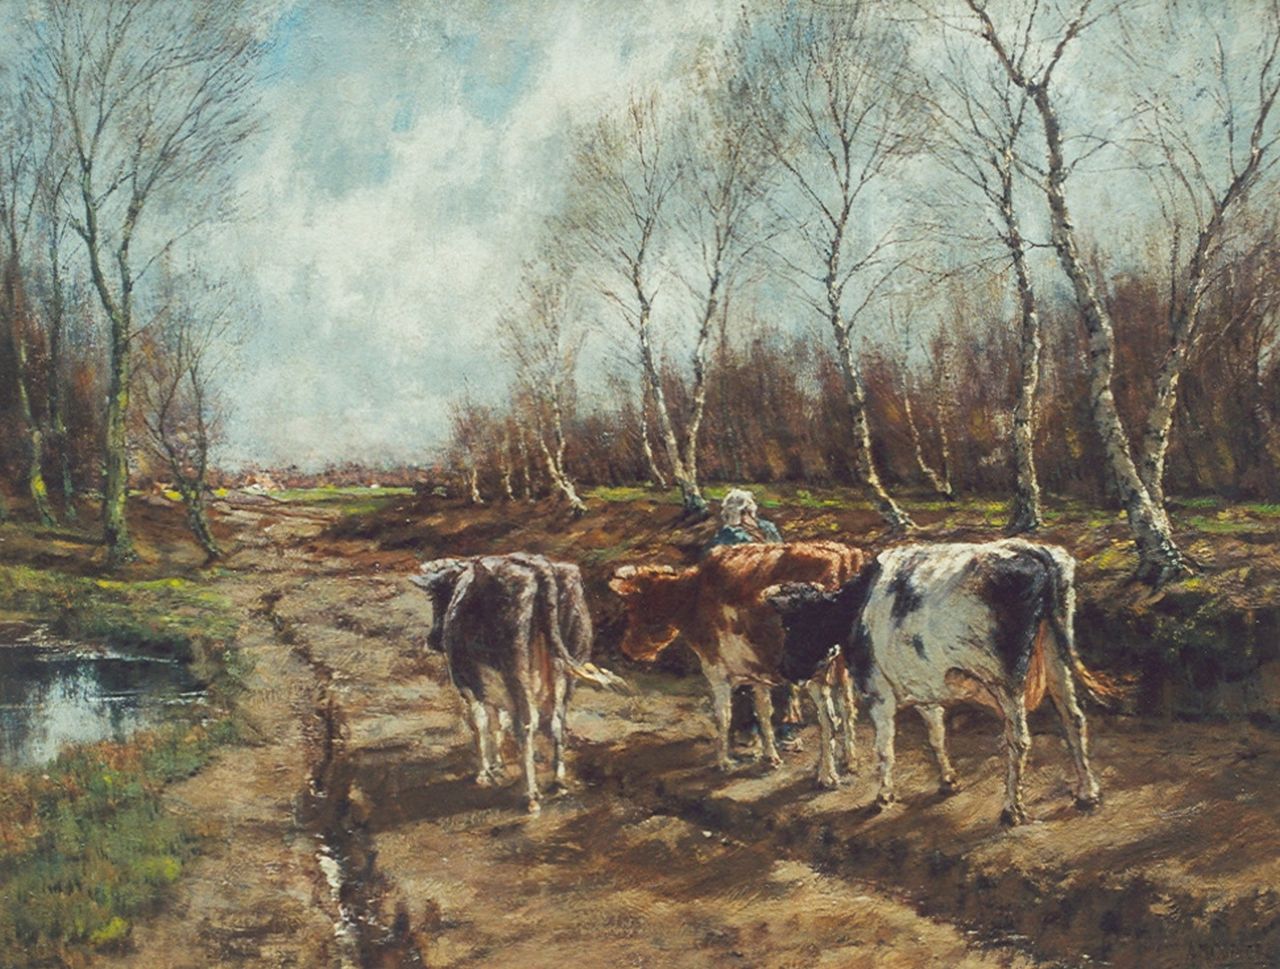 Gorter A.M.  | 'Arnold' Marc Gorter, Cows in an autumn landscape, oil on canvas 66.8 x 87.0 cm, signed l.r.